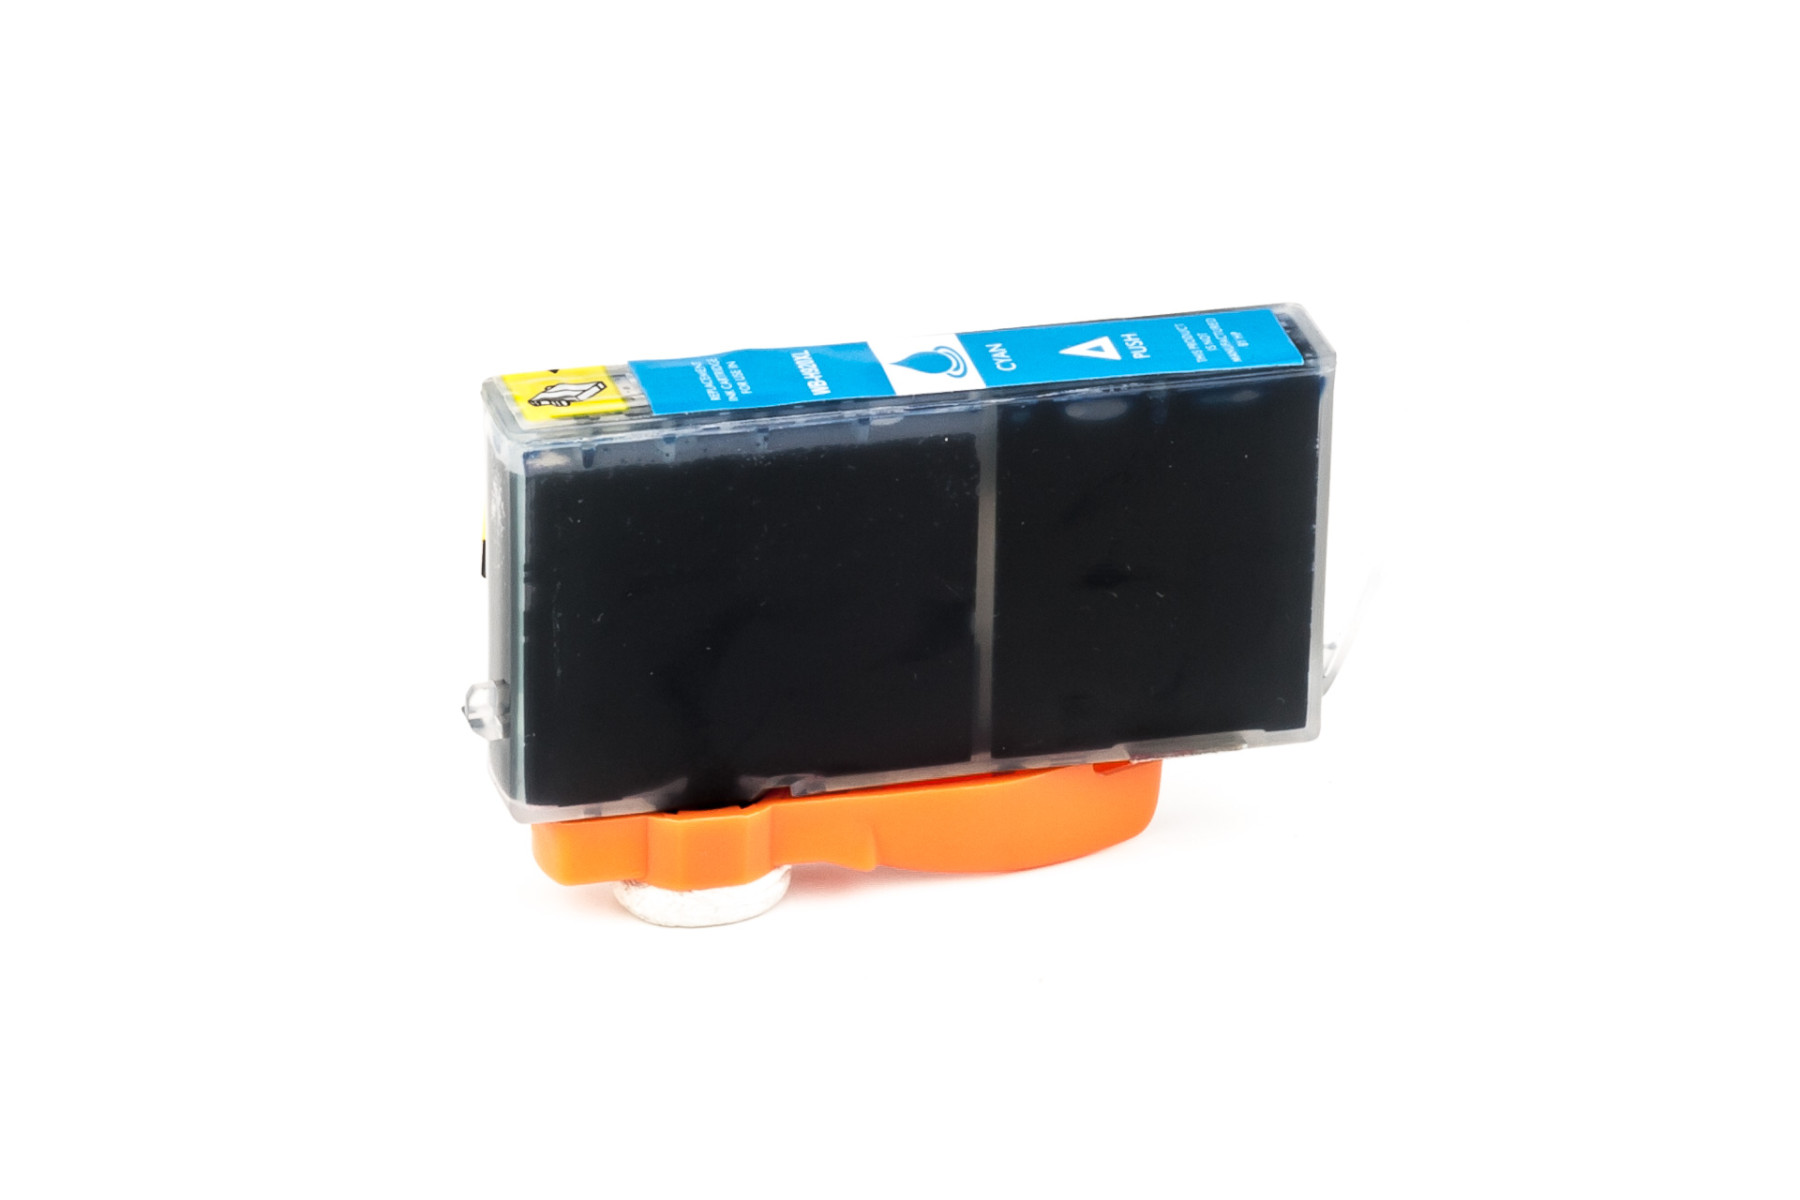 Set consisting of Ink cartridge (alternative) compatible with HP - CD975AE /  CD 975 AE /  920XL - Officejet 6000 black, CD972AE/CD 972 AE - 920XL - Officejet 6000 cyan, CD973AE/CD 973 AE - 920XL - Officejet 6000 magenta, CD974AE/CD 974 AE - 920XL - Offic